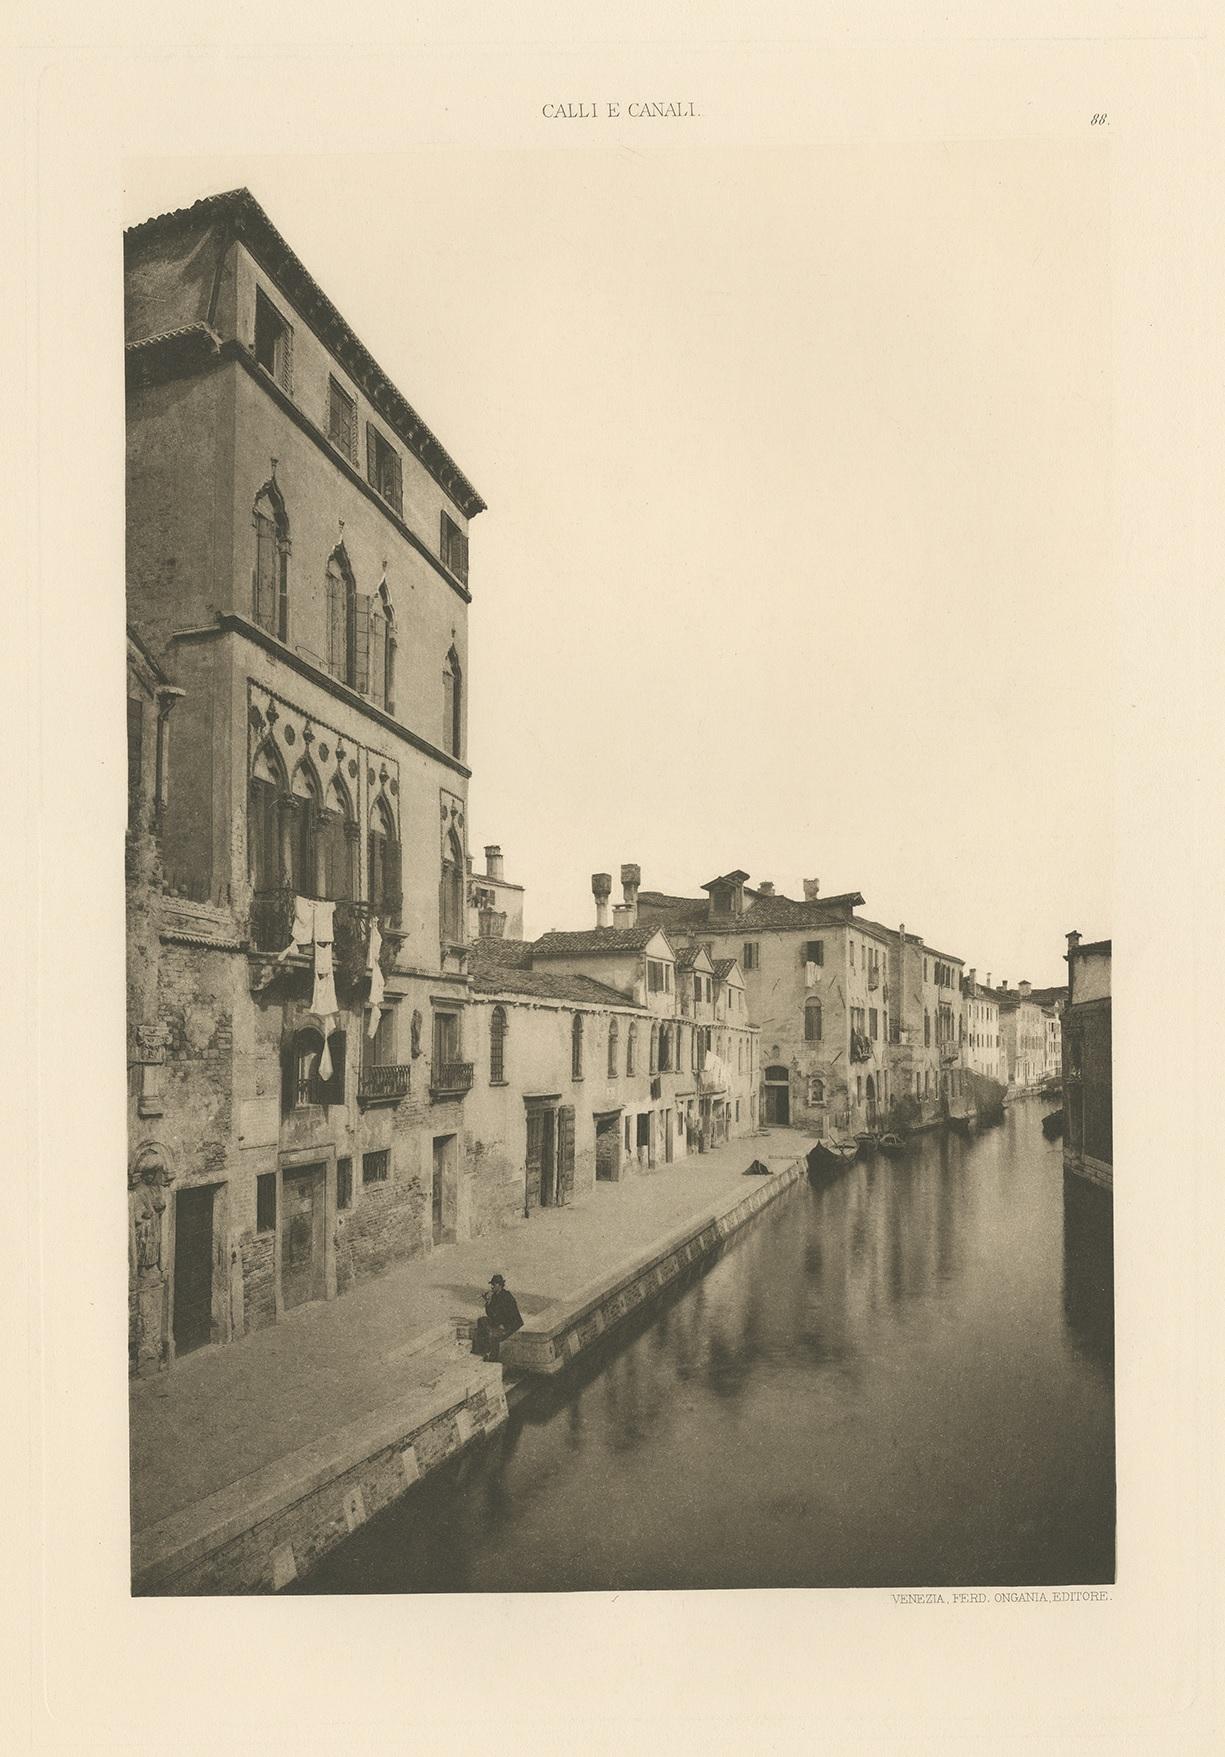 Photogravure of the Tintoretto House in Venice. The house in which Jacopo Robusti, surnamed the Tintoretto, lived from 1574 till his death in 1594. It is located close to the Campo dei Mori in the protected district of Cannaregio.

This print